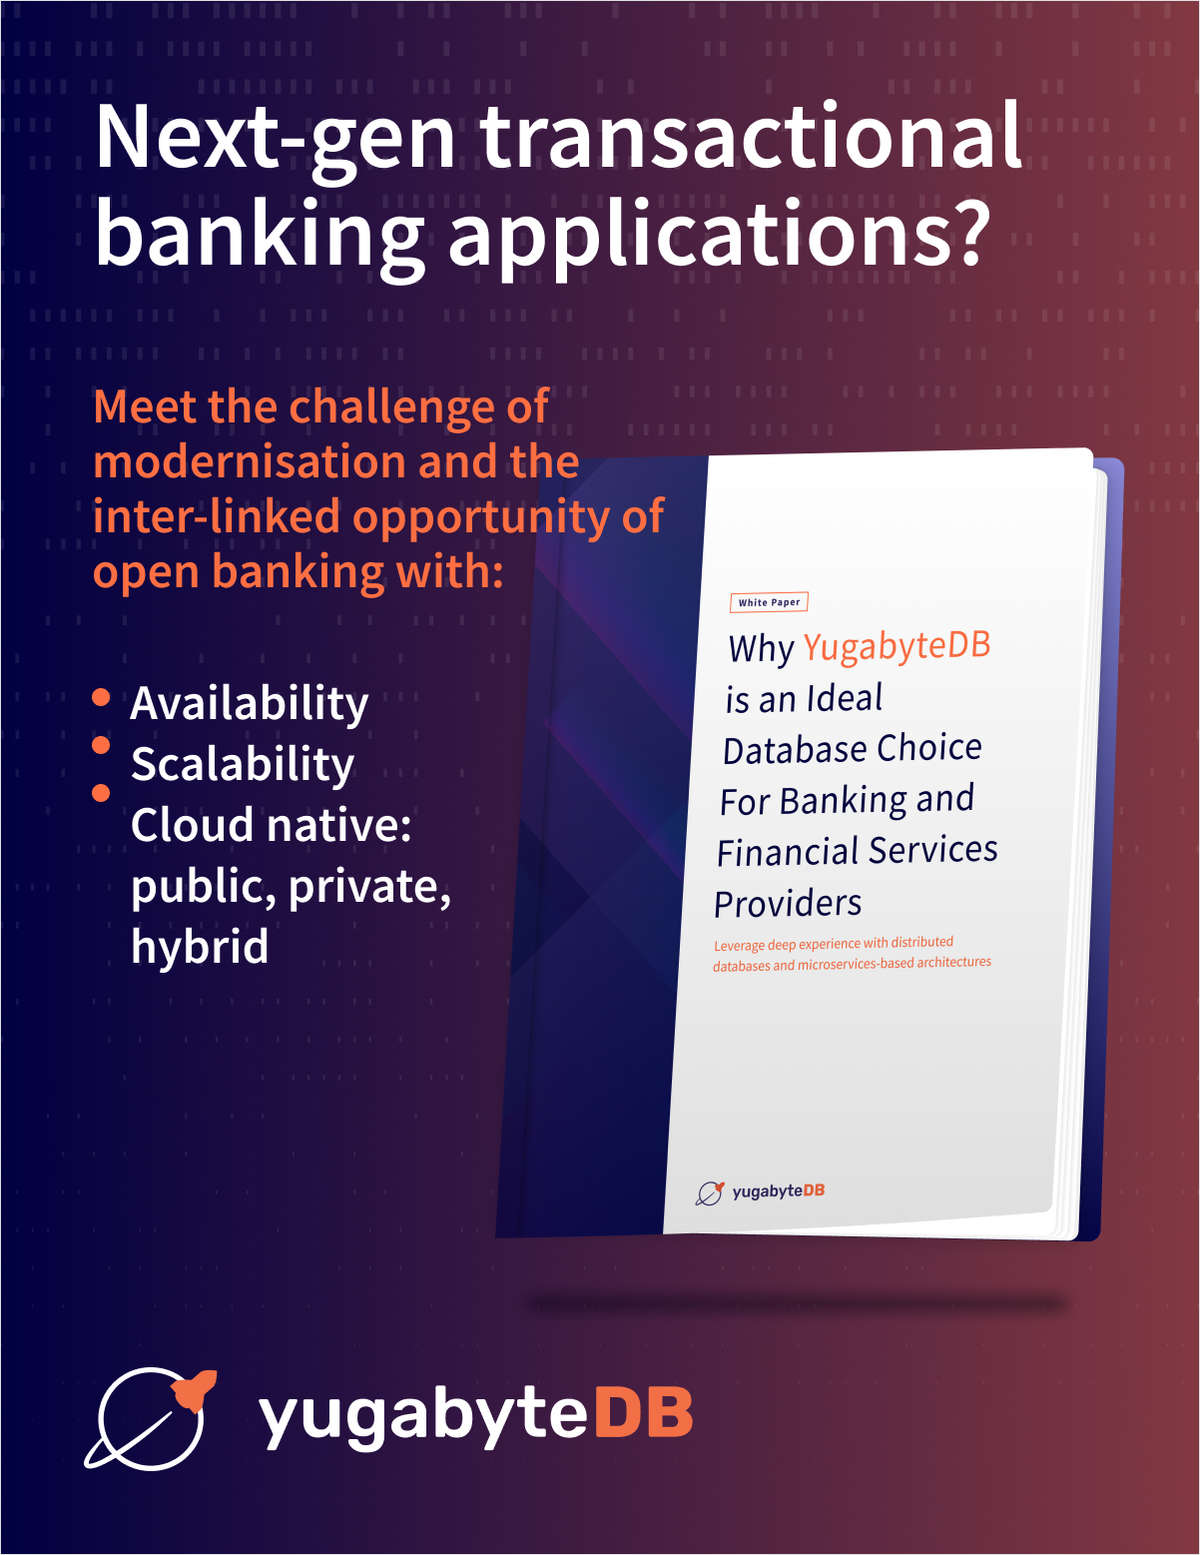 Why YugabyteDB is an Ideal Database Choice for Banking and Financial Services Providers